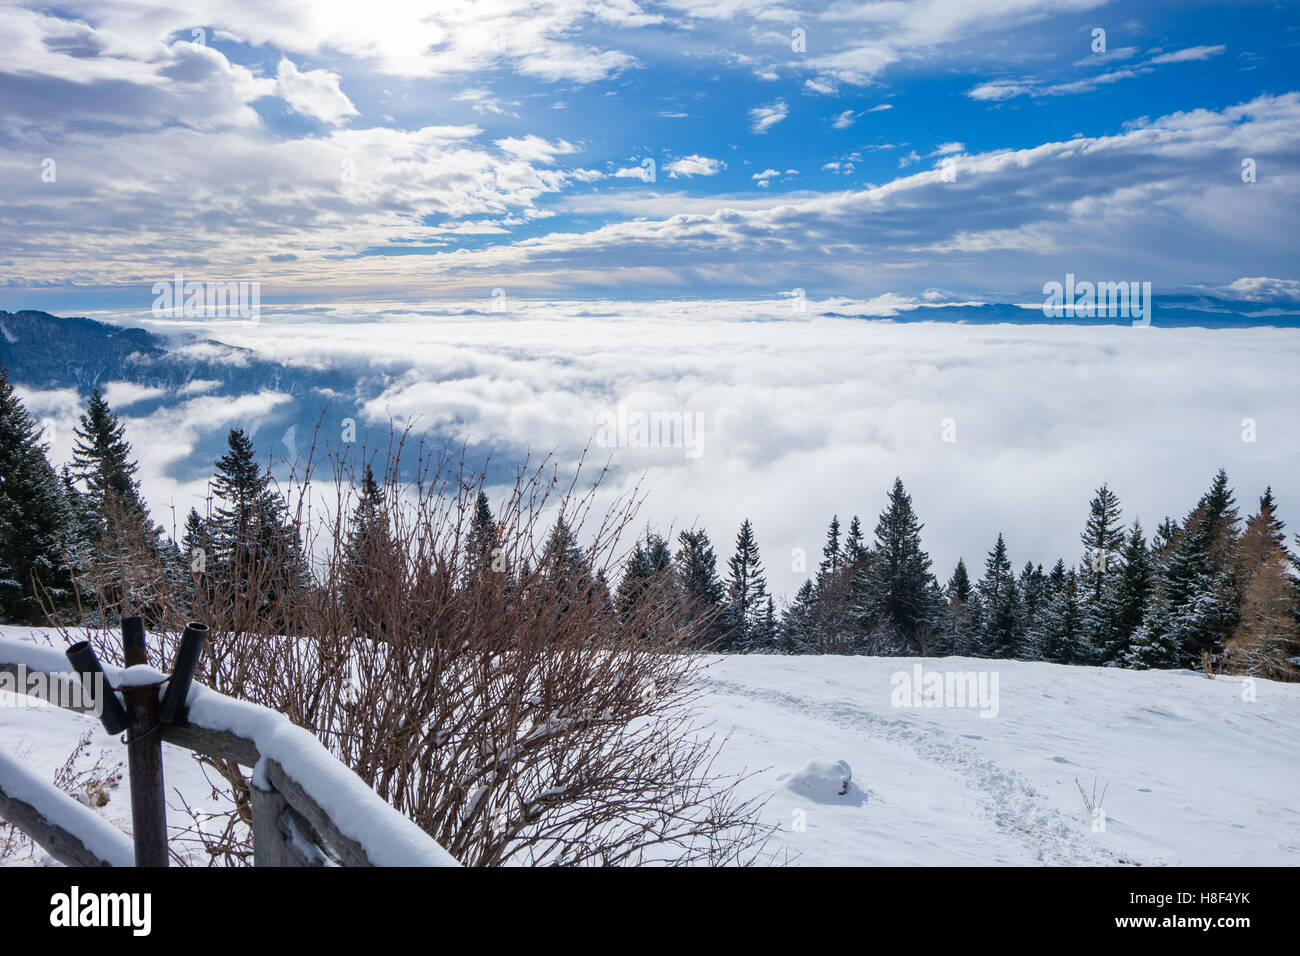 View from the mountains with clouds above and below Stock Photo